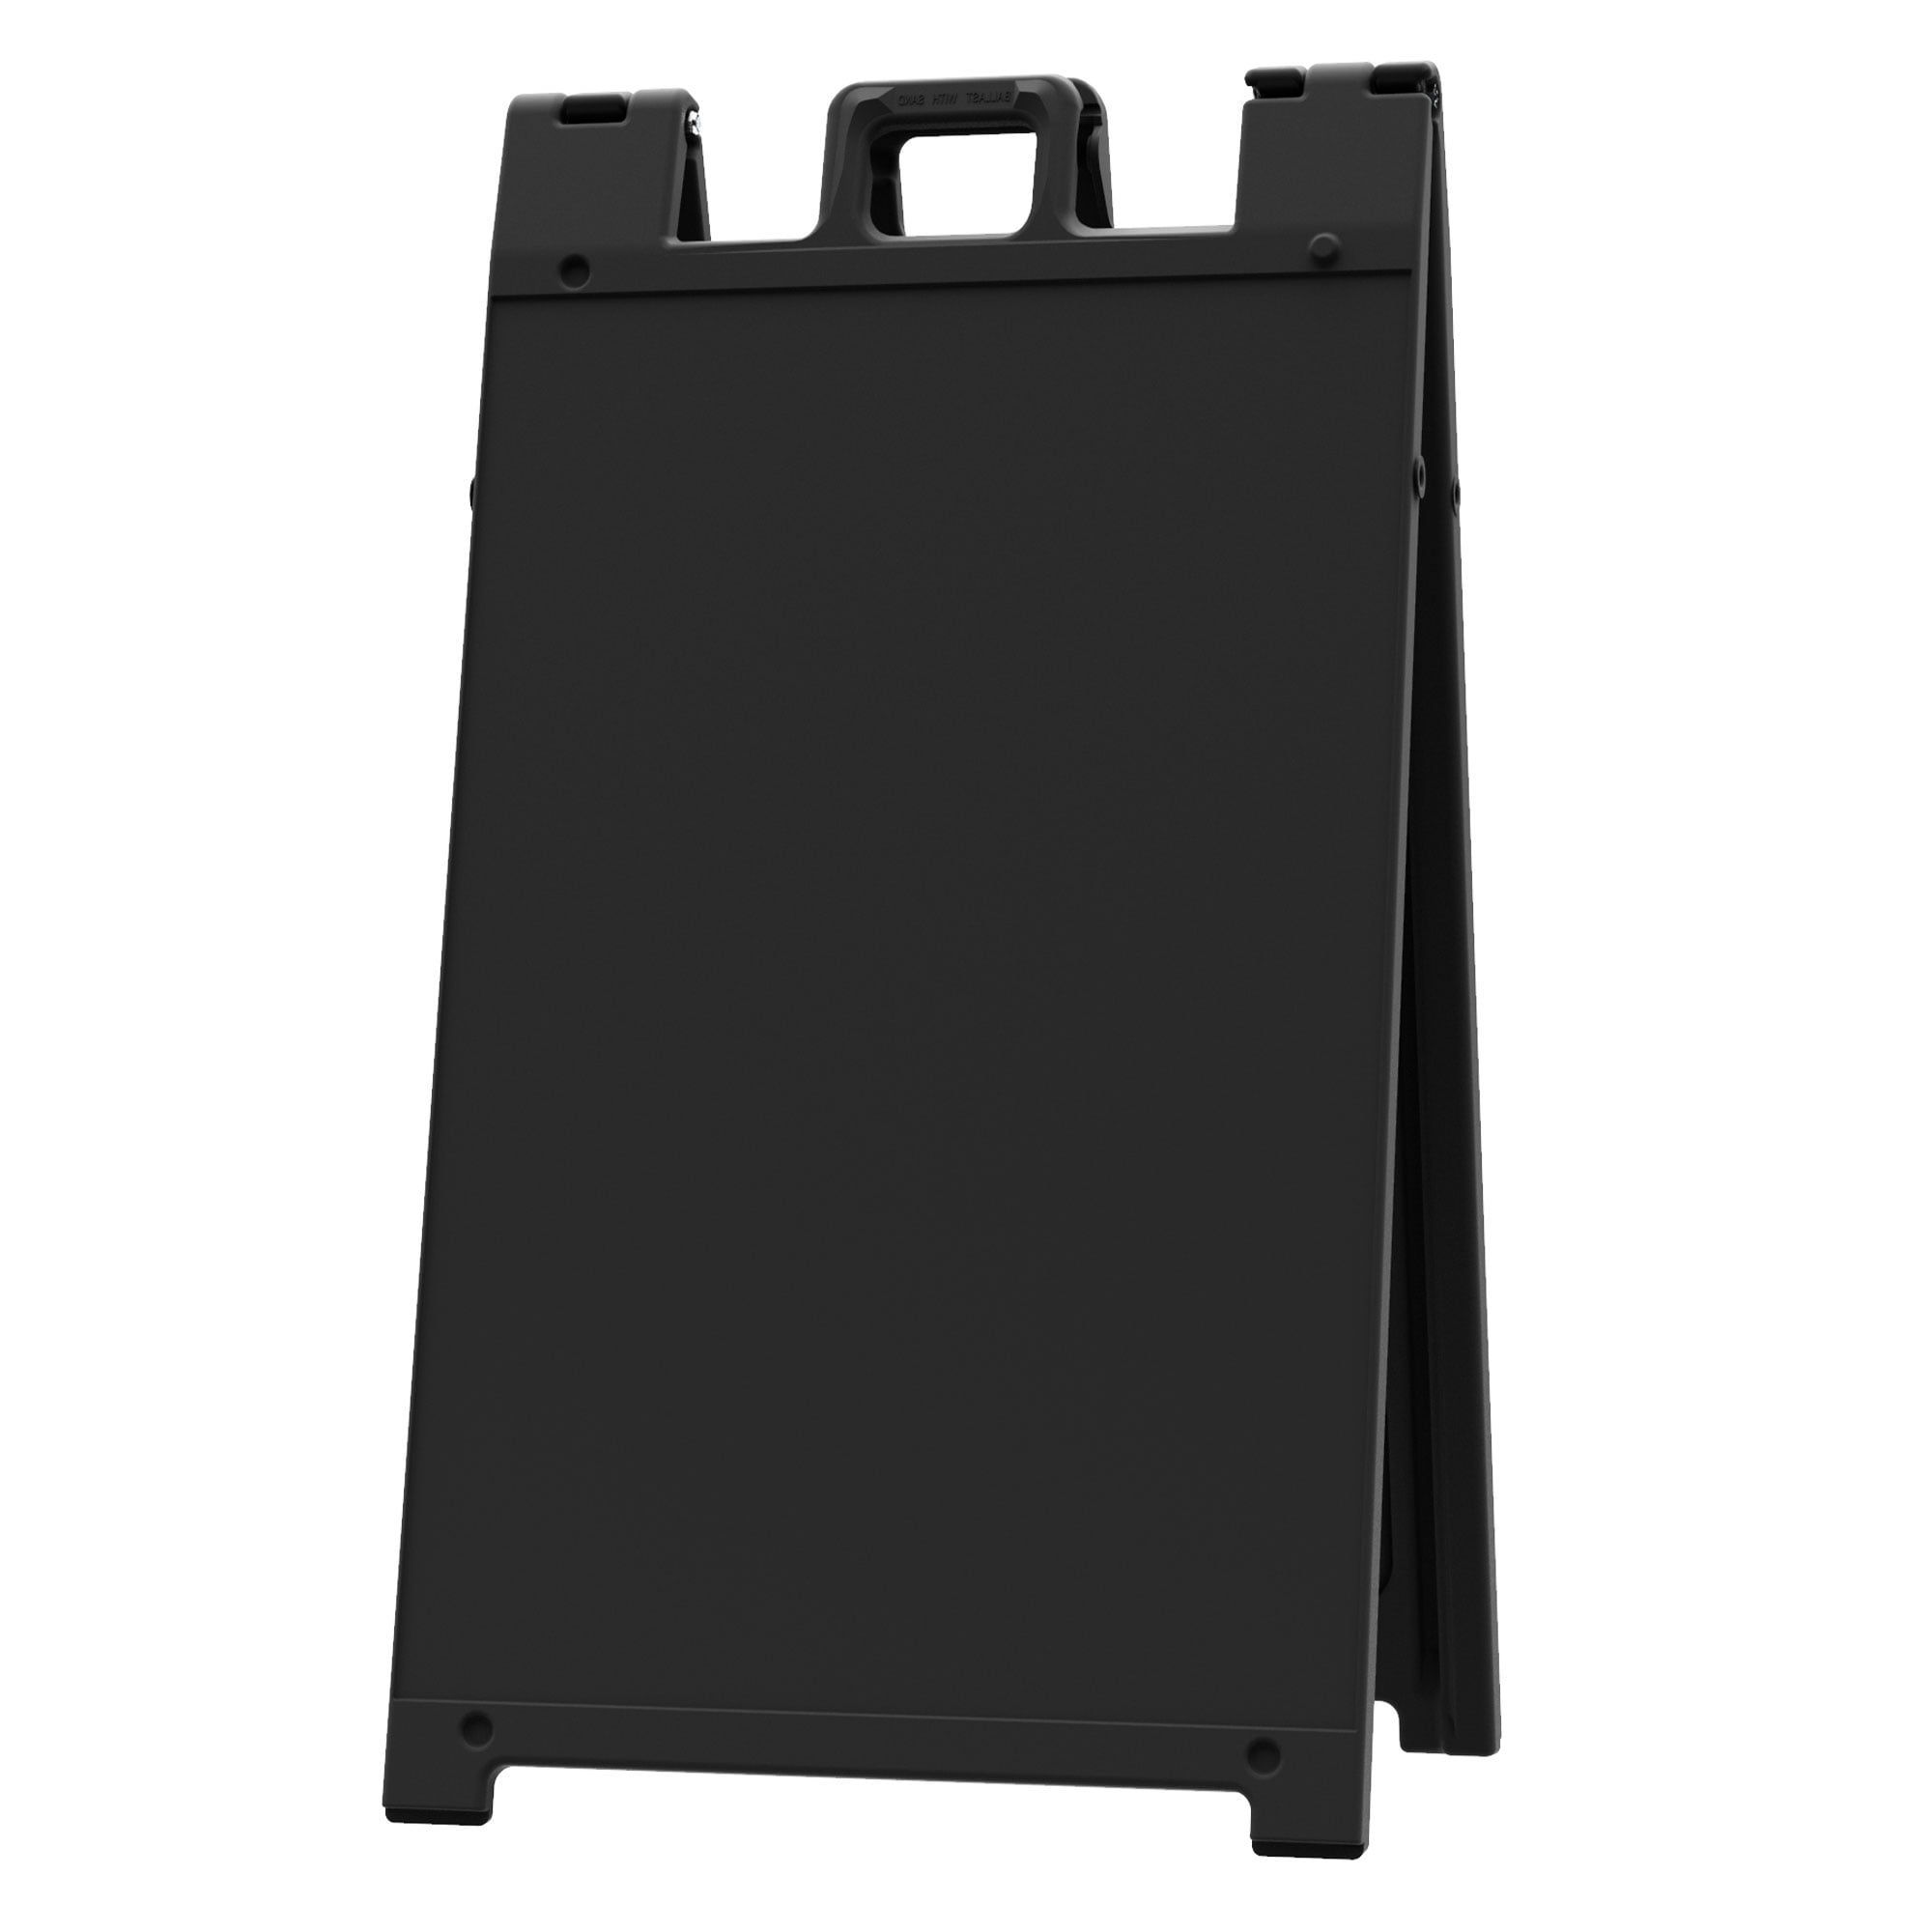 Plasticade Deluxe Signicade Portable Folding Double Sided Sign Stand Black 